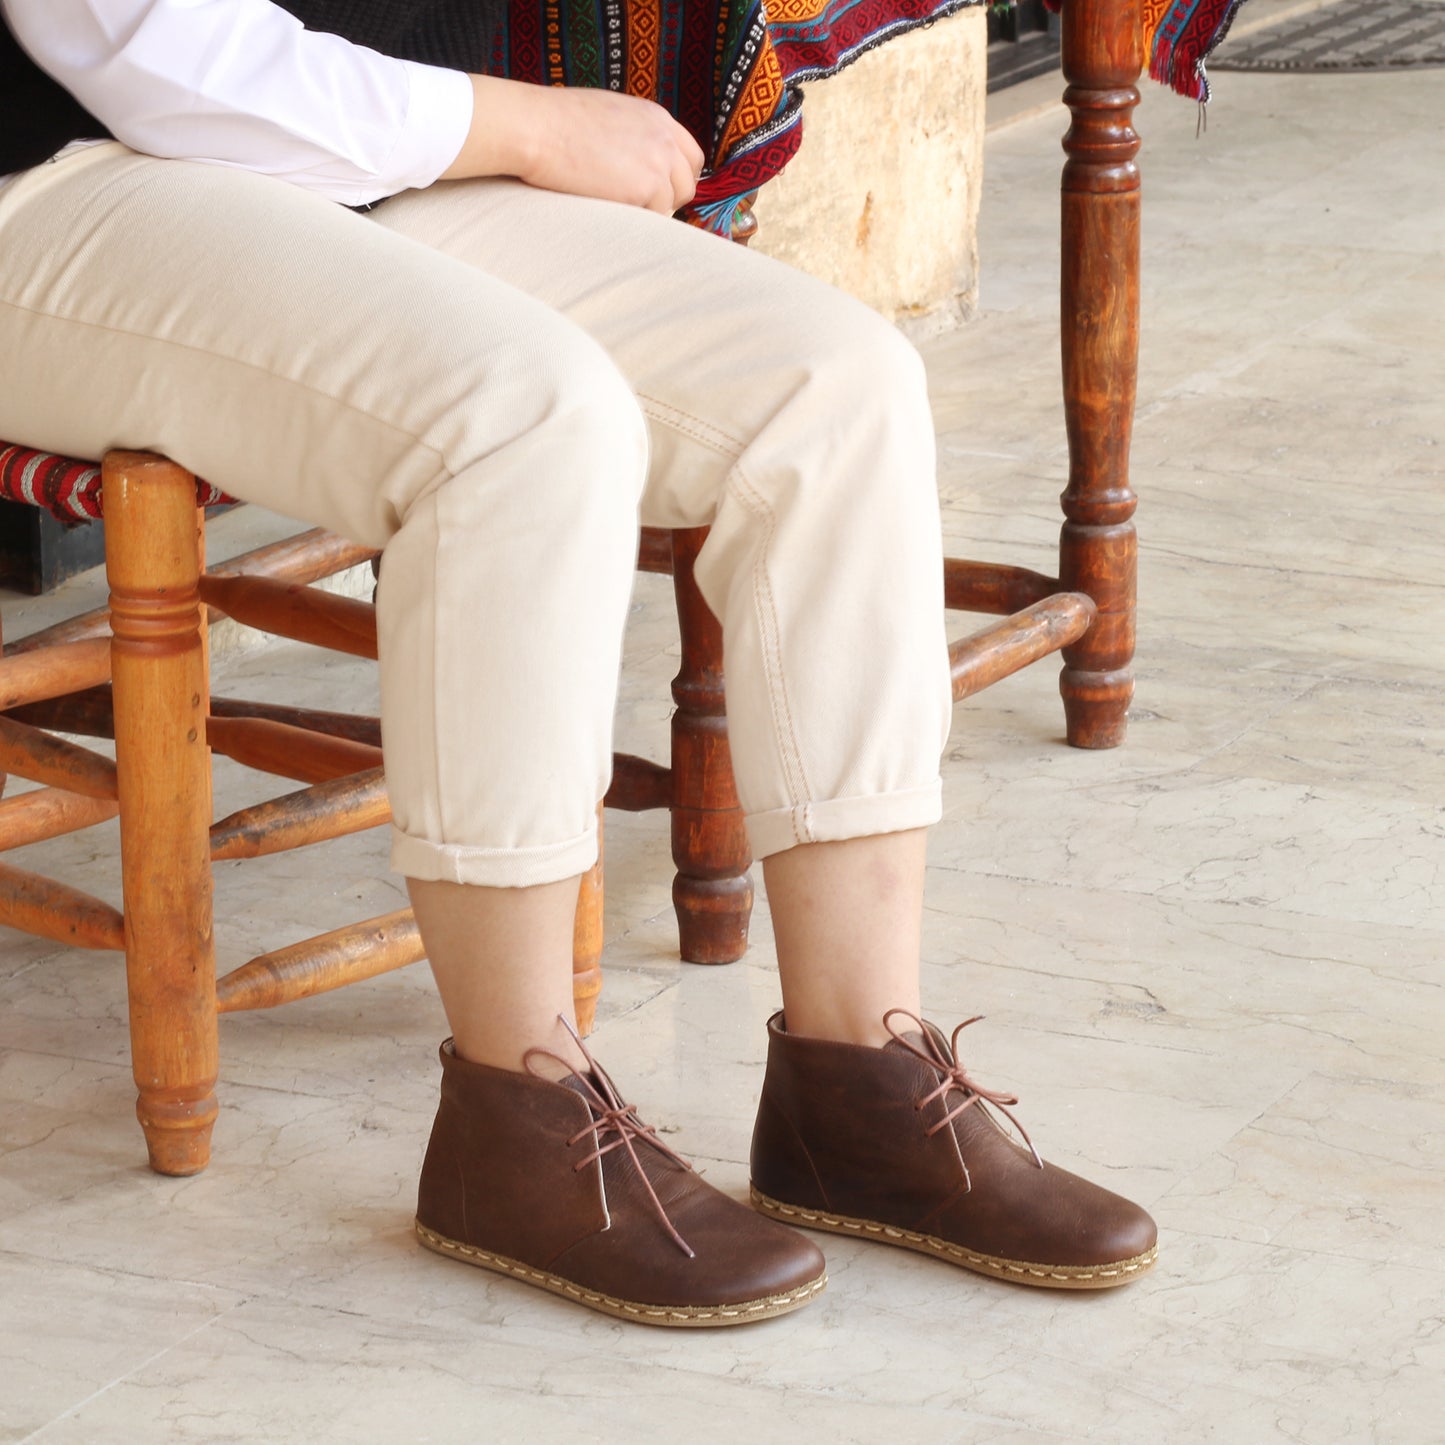 Handmade Zero Drop Barefoot Leather Boots for Women - Oxford Ankle in Crazy Brown